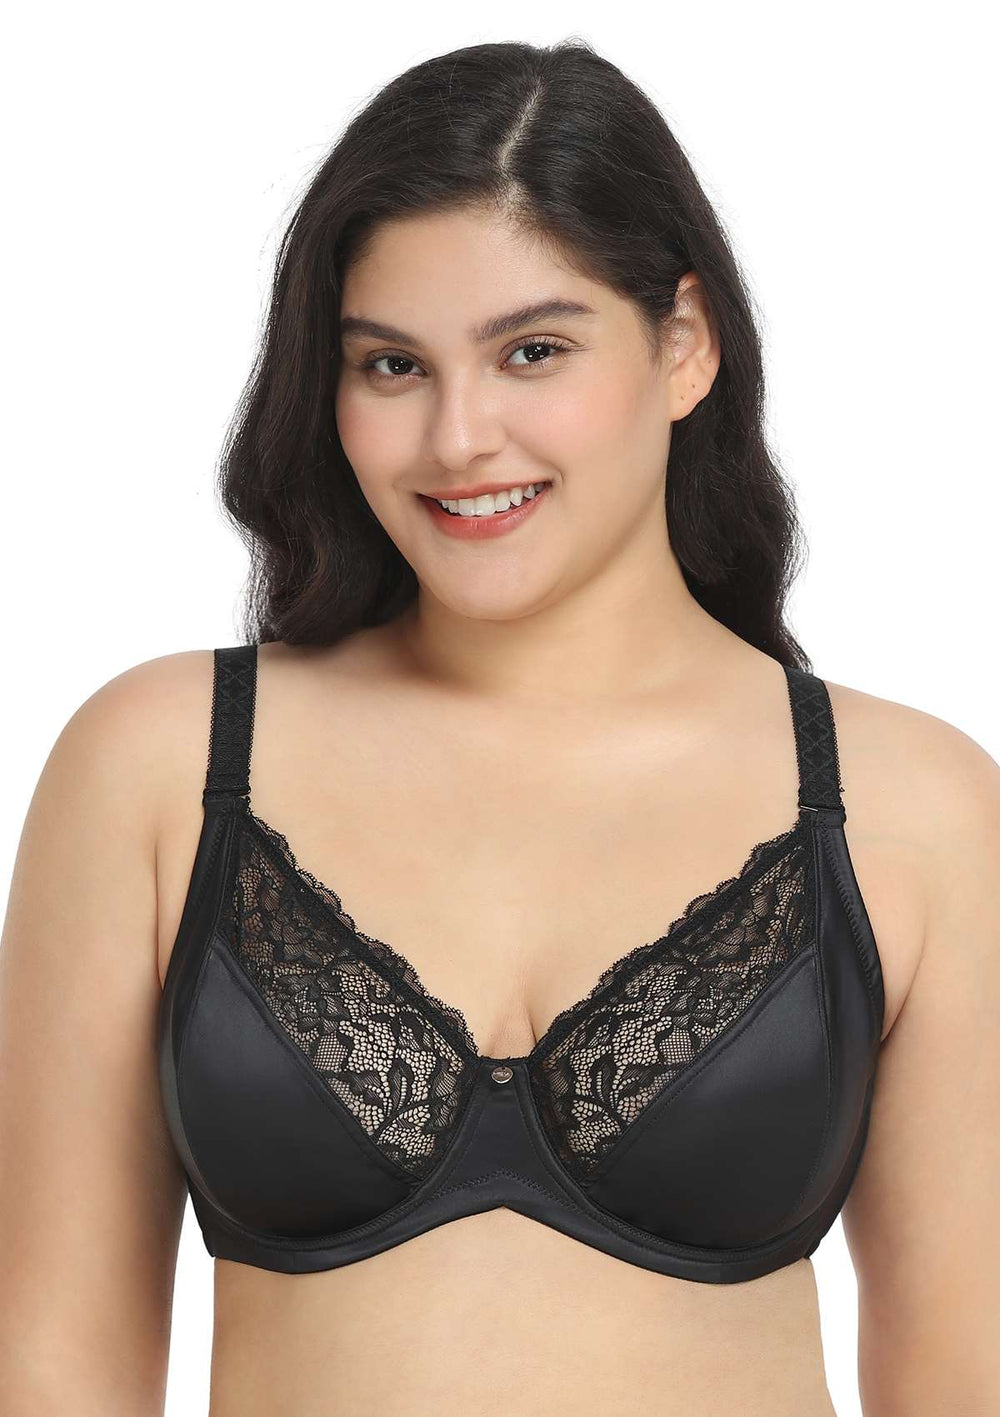 HSIA Foxy Satin Silky Full Coverage Underwire Bra with Floral Lace